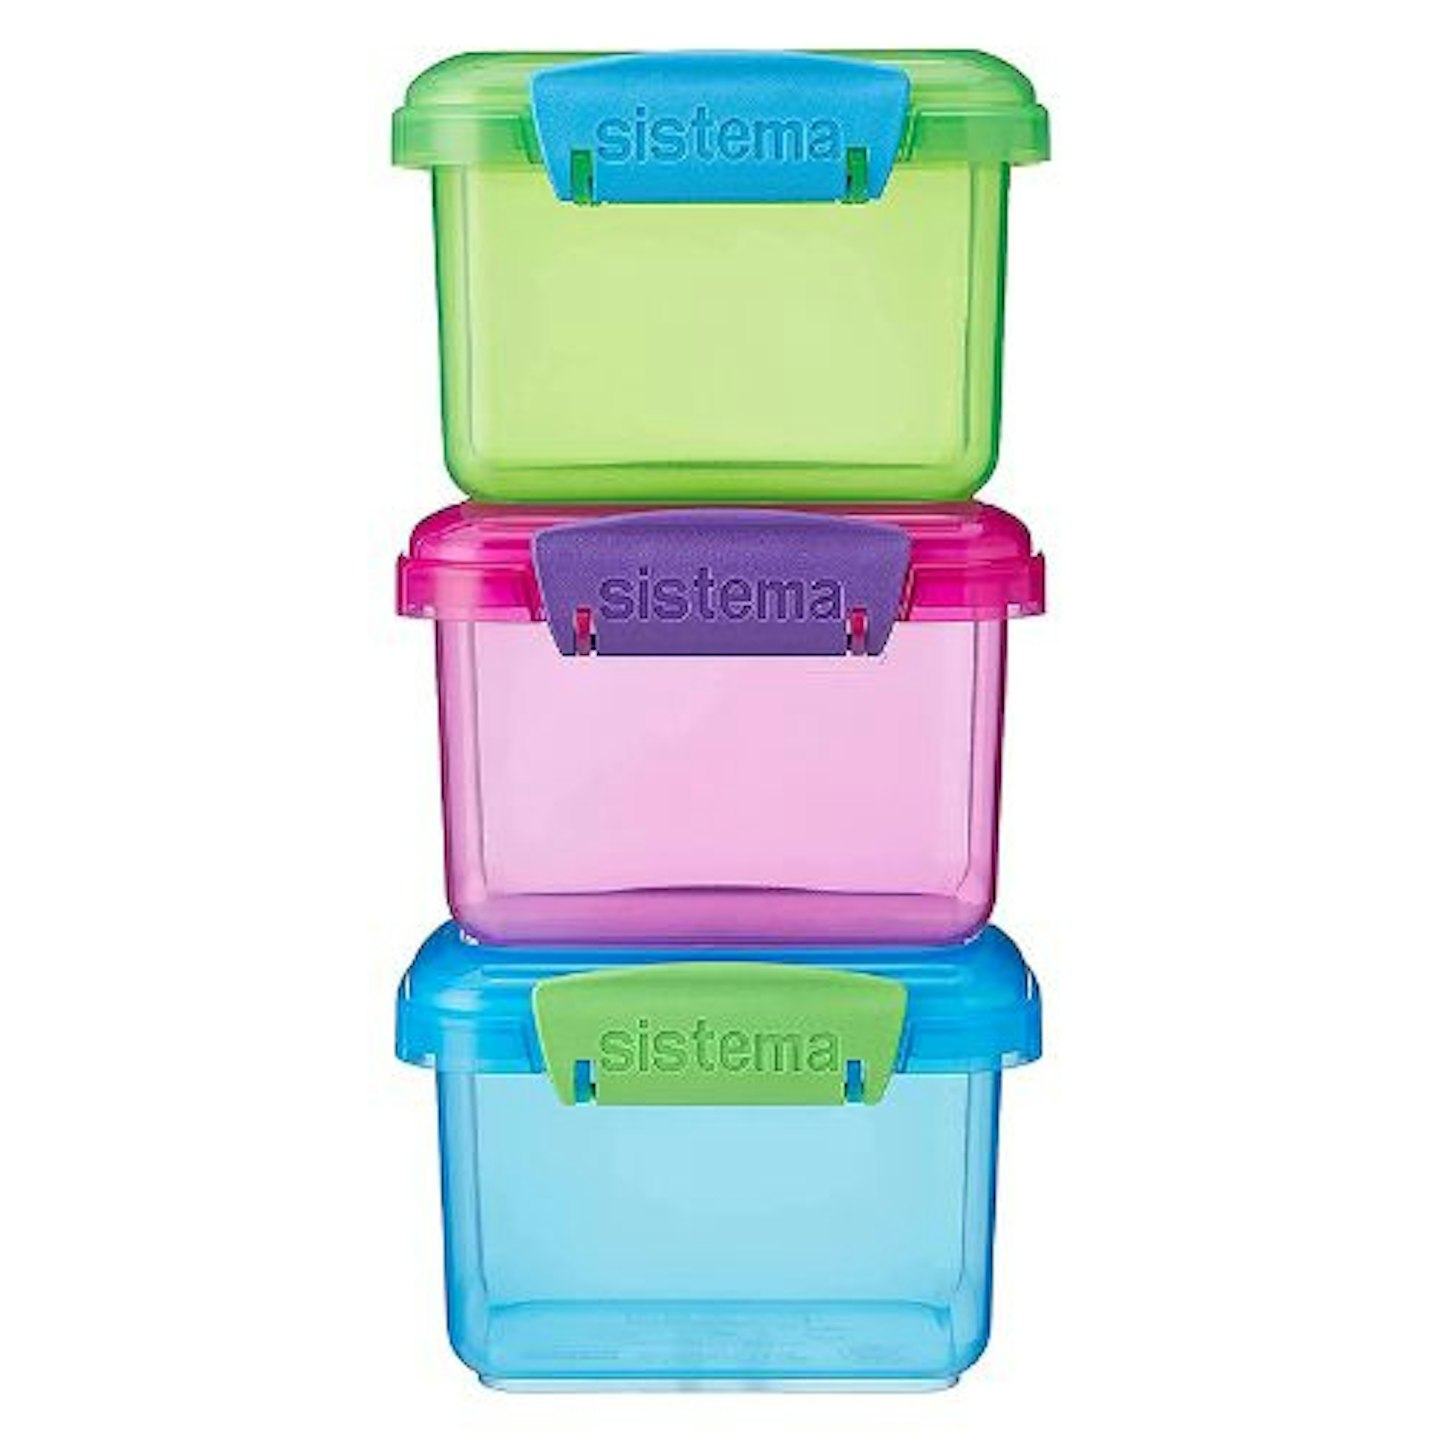 https://images.bauerhosting.com/celebrity/sites/3/2022/07/Sistema-Lunch-Food-Storage-Containers.jpg?auto=format&w=1440&q=80